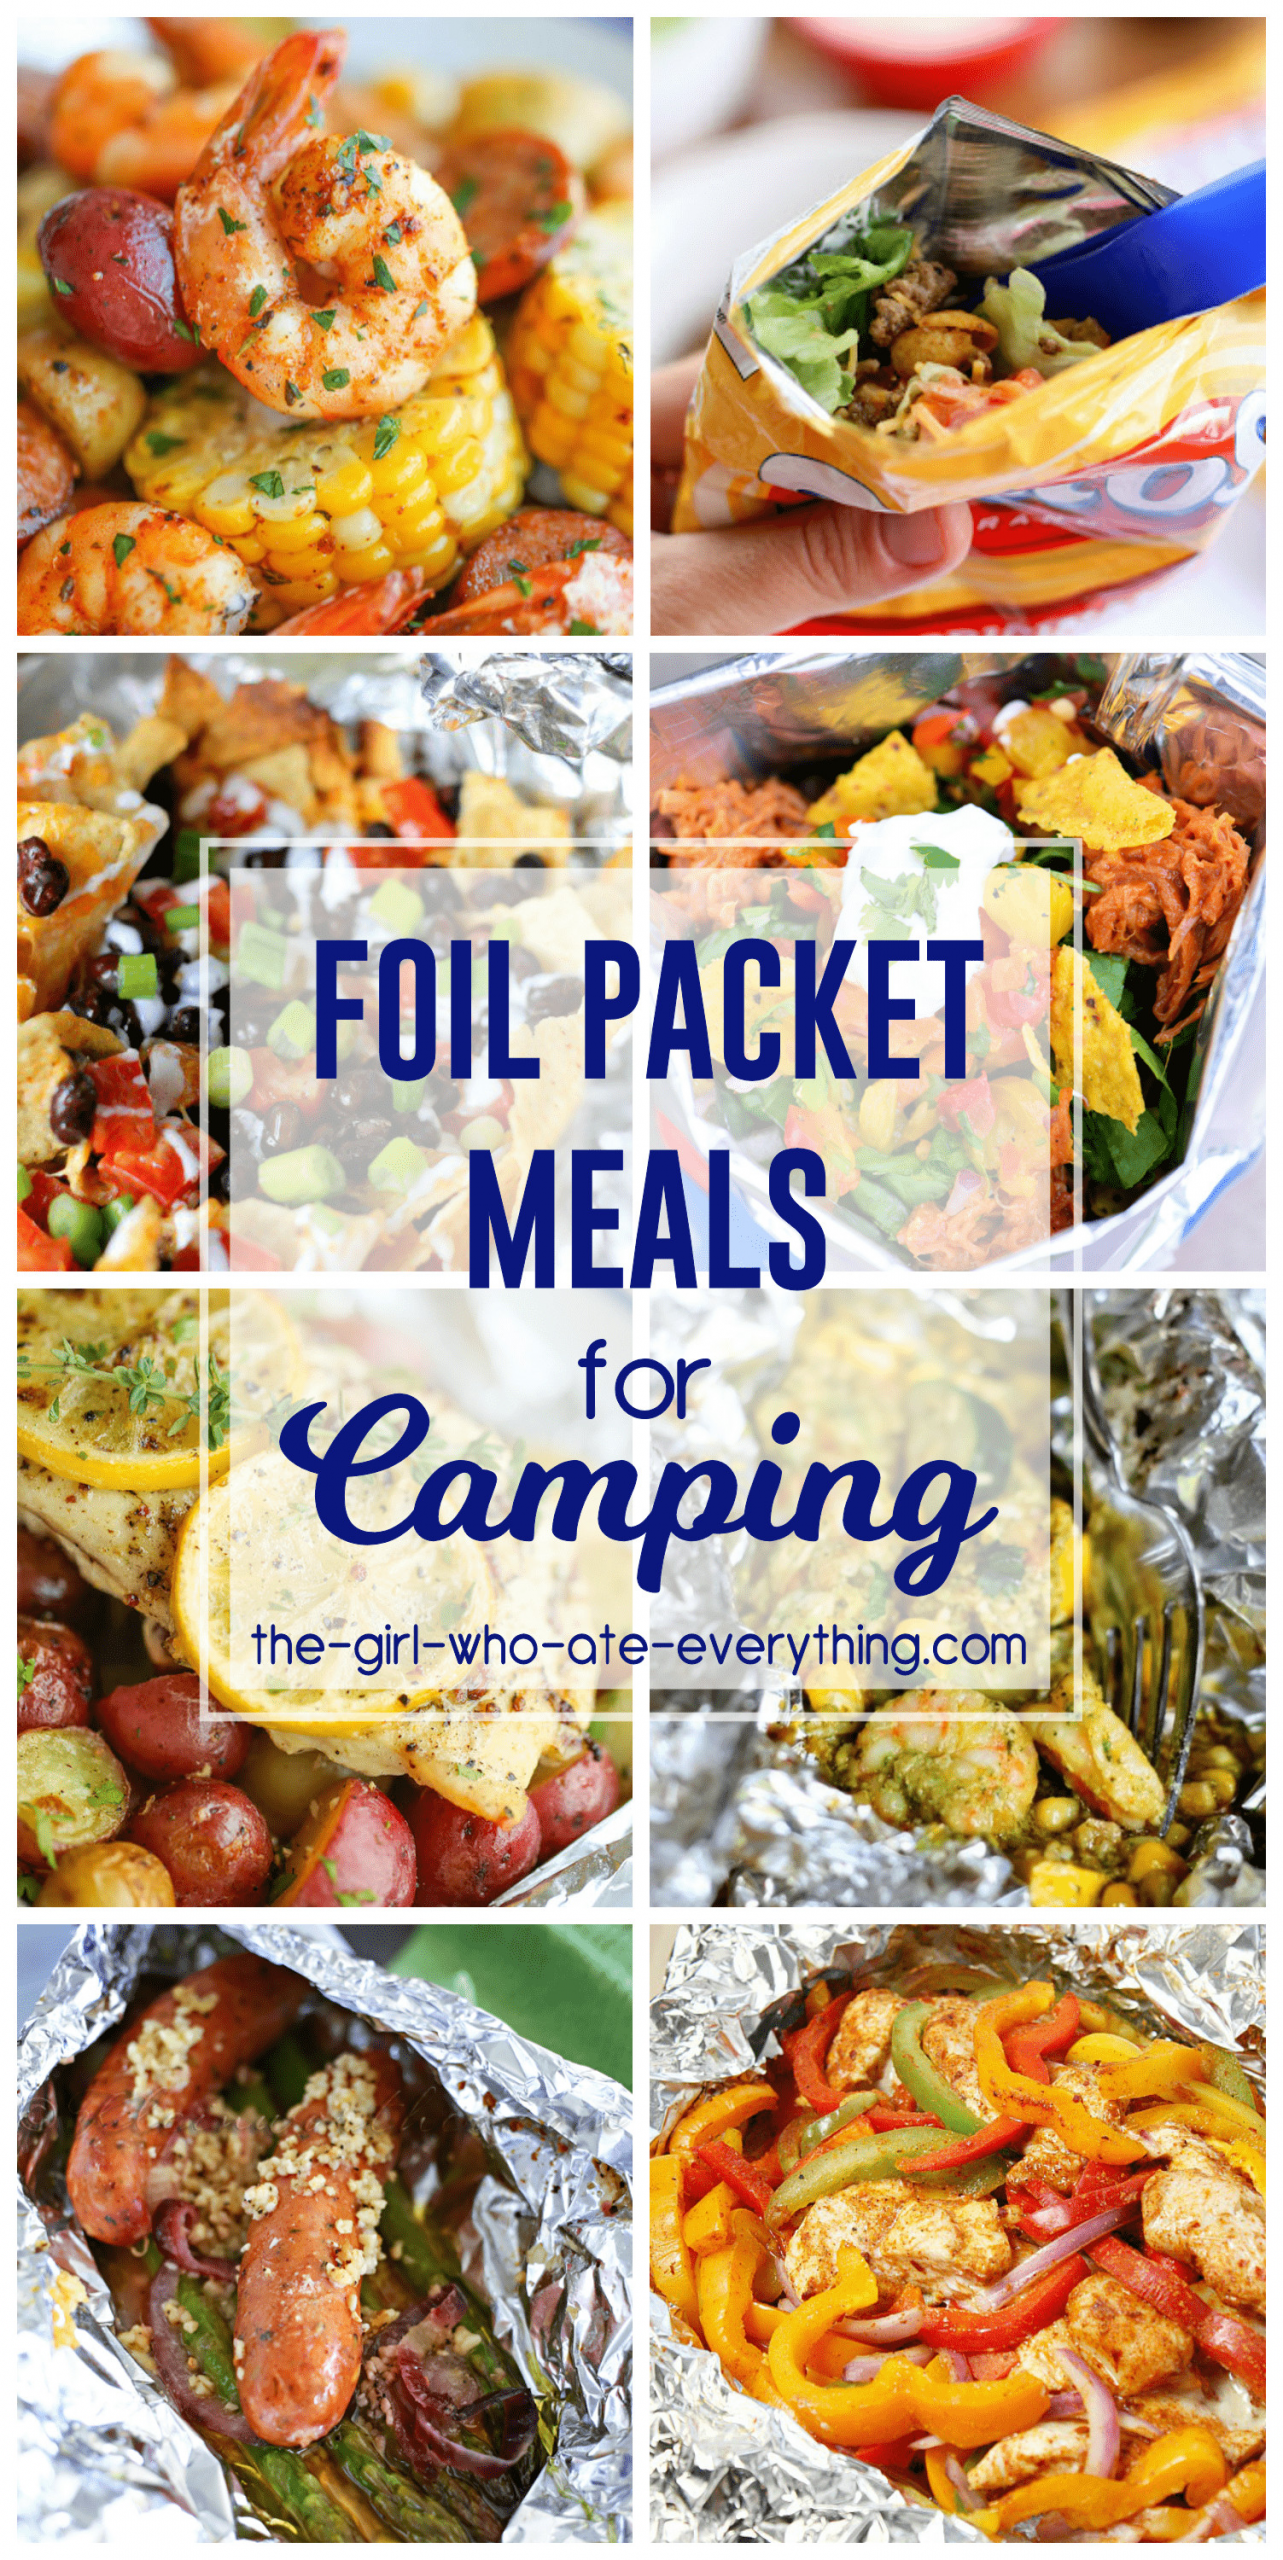 Easy Camping Dinner Ideas
 Foil Packet Meals for Camping The Girl Who Ate Everything